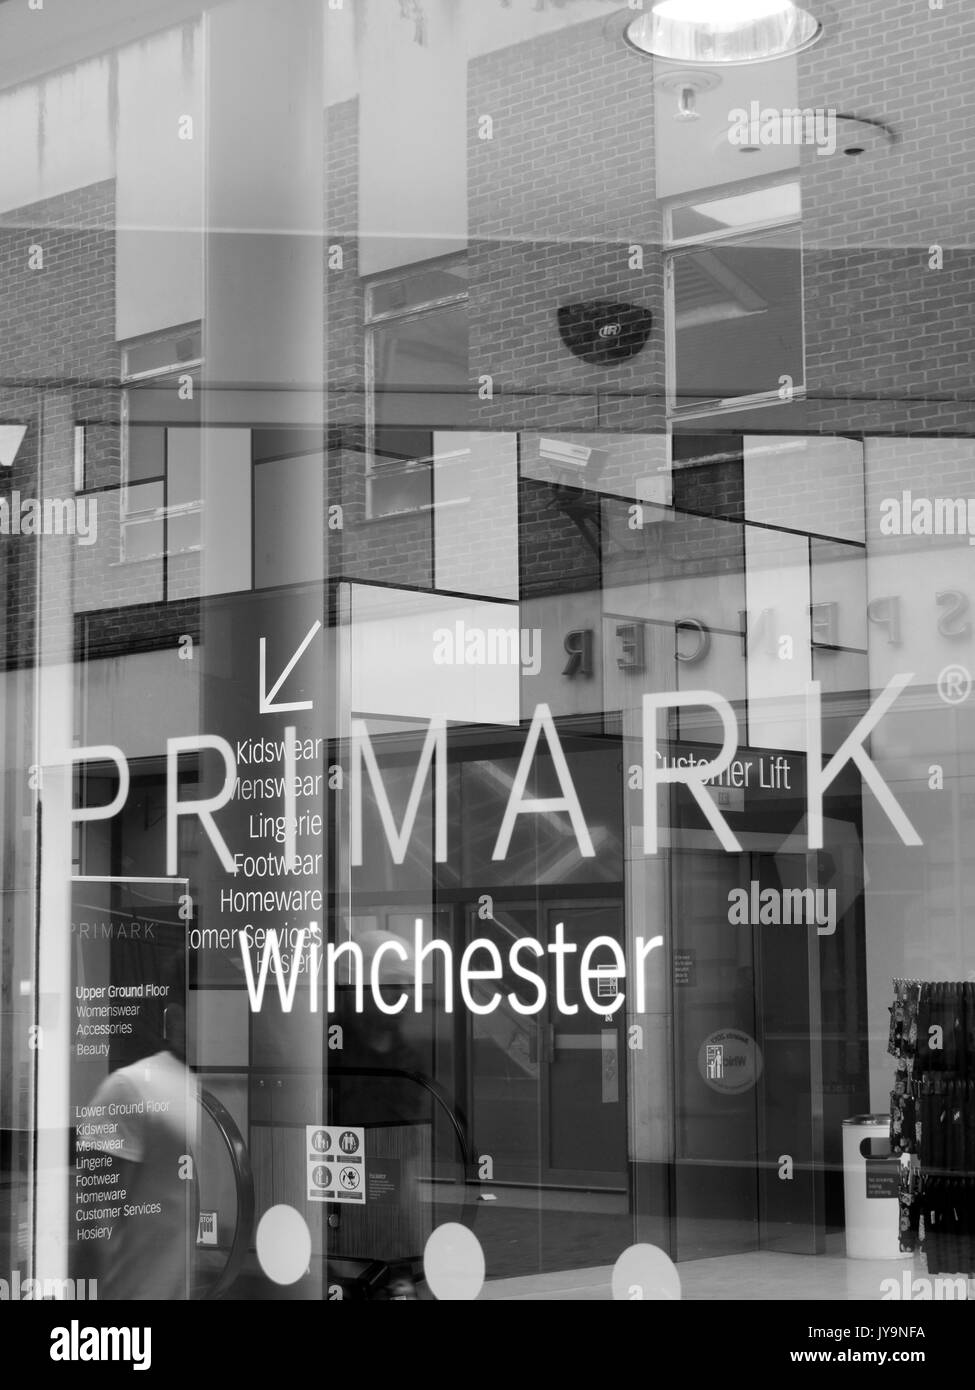 Primark clothes Black and White Stock Photos & Images - Alamy